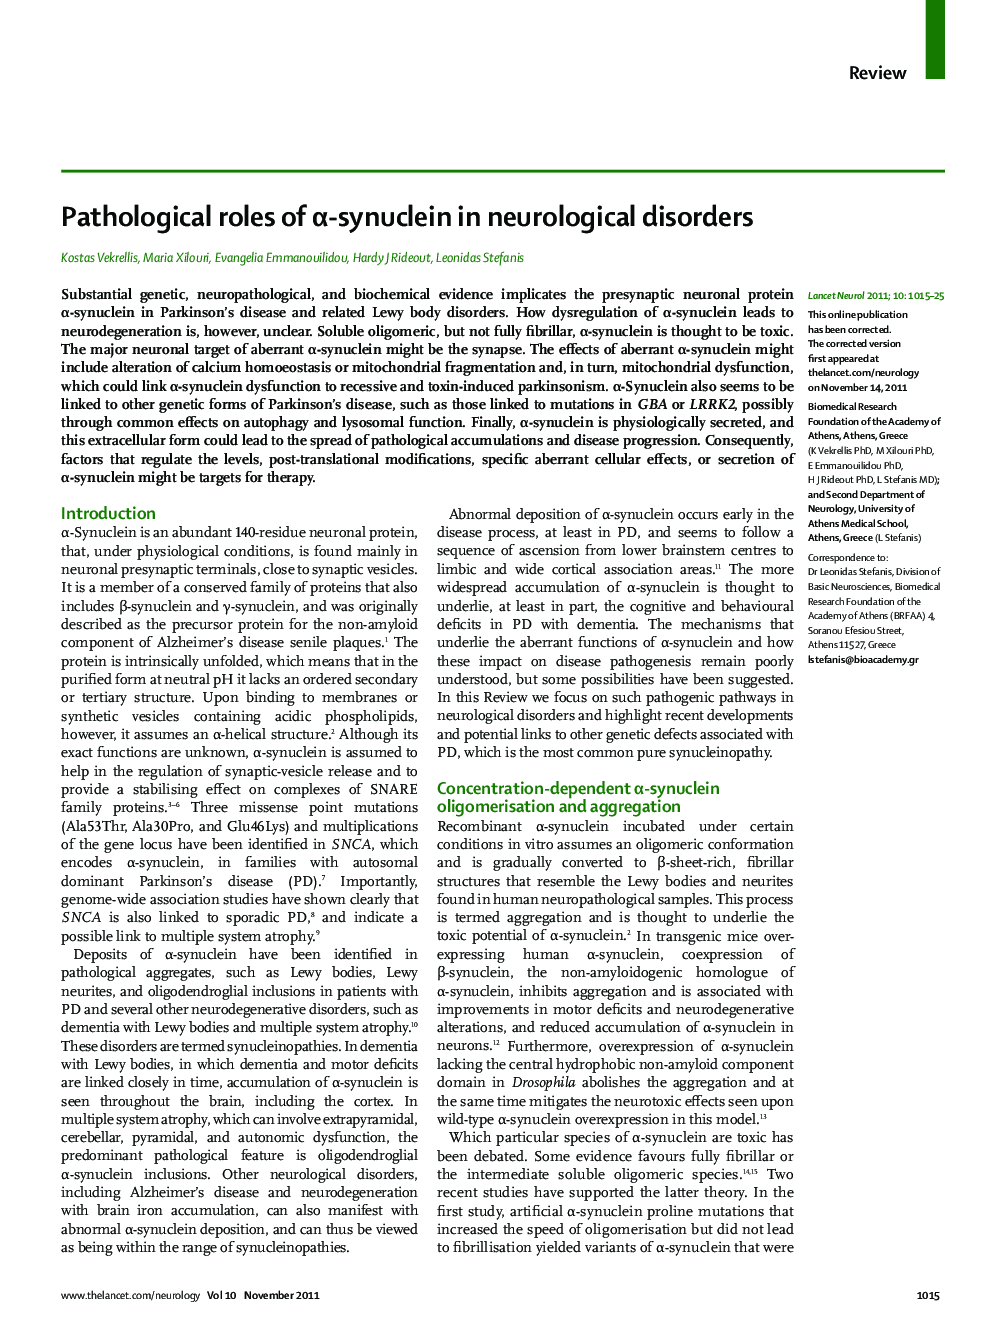 Pathological roles of α-synuclein in neurological disorders